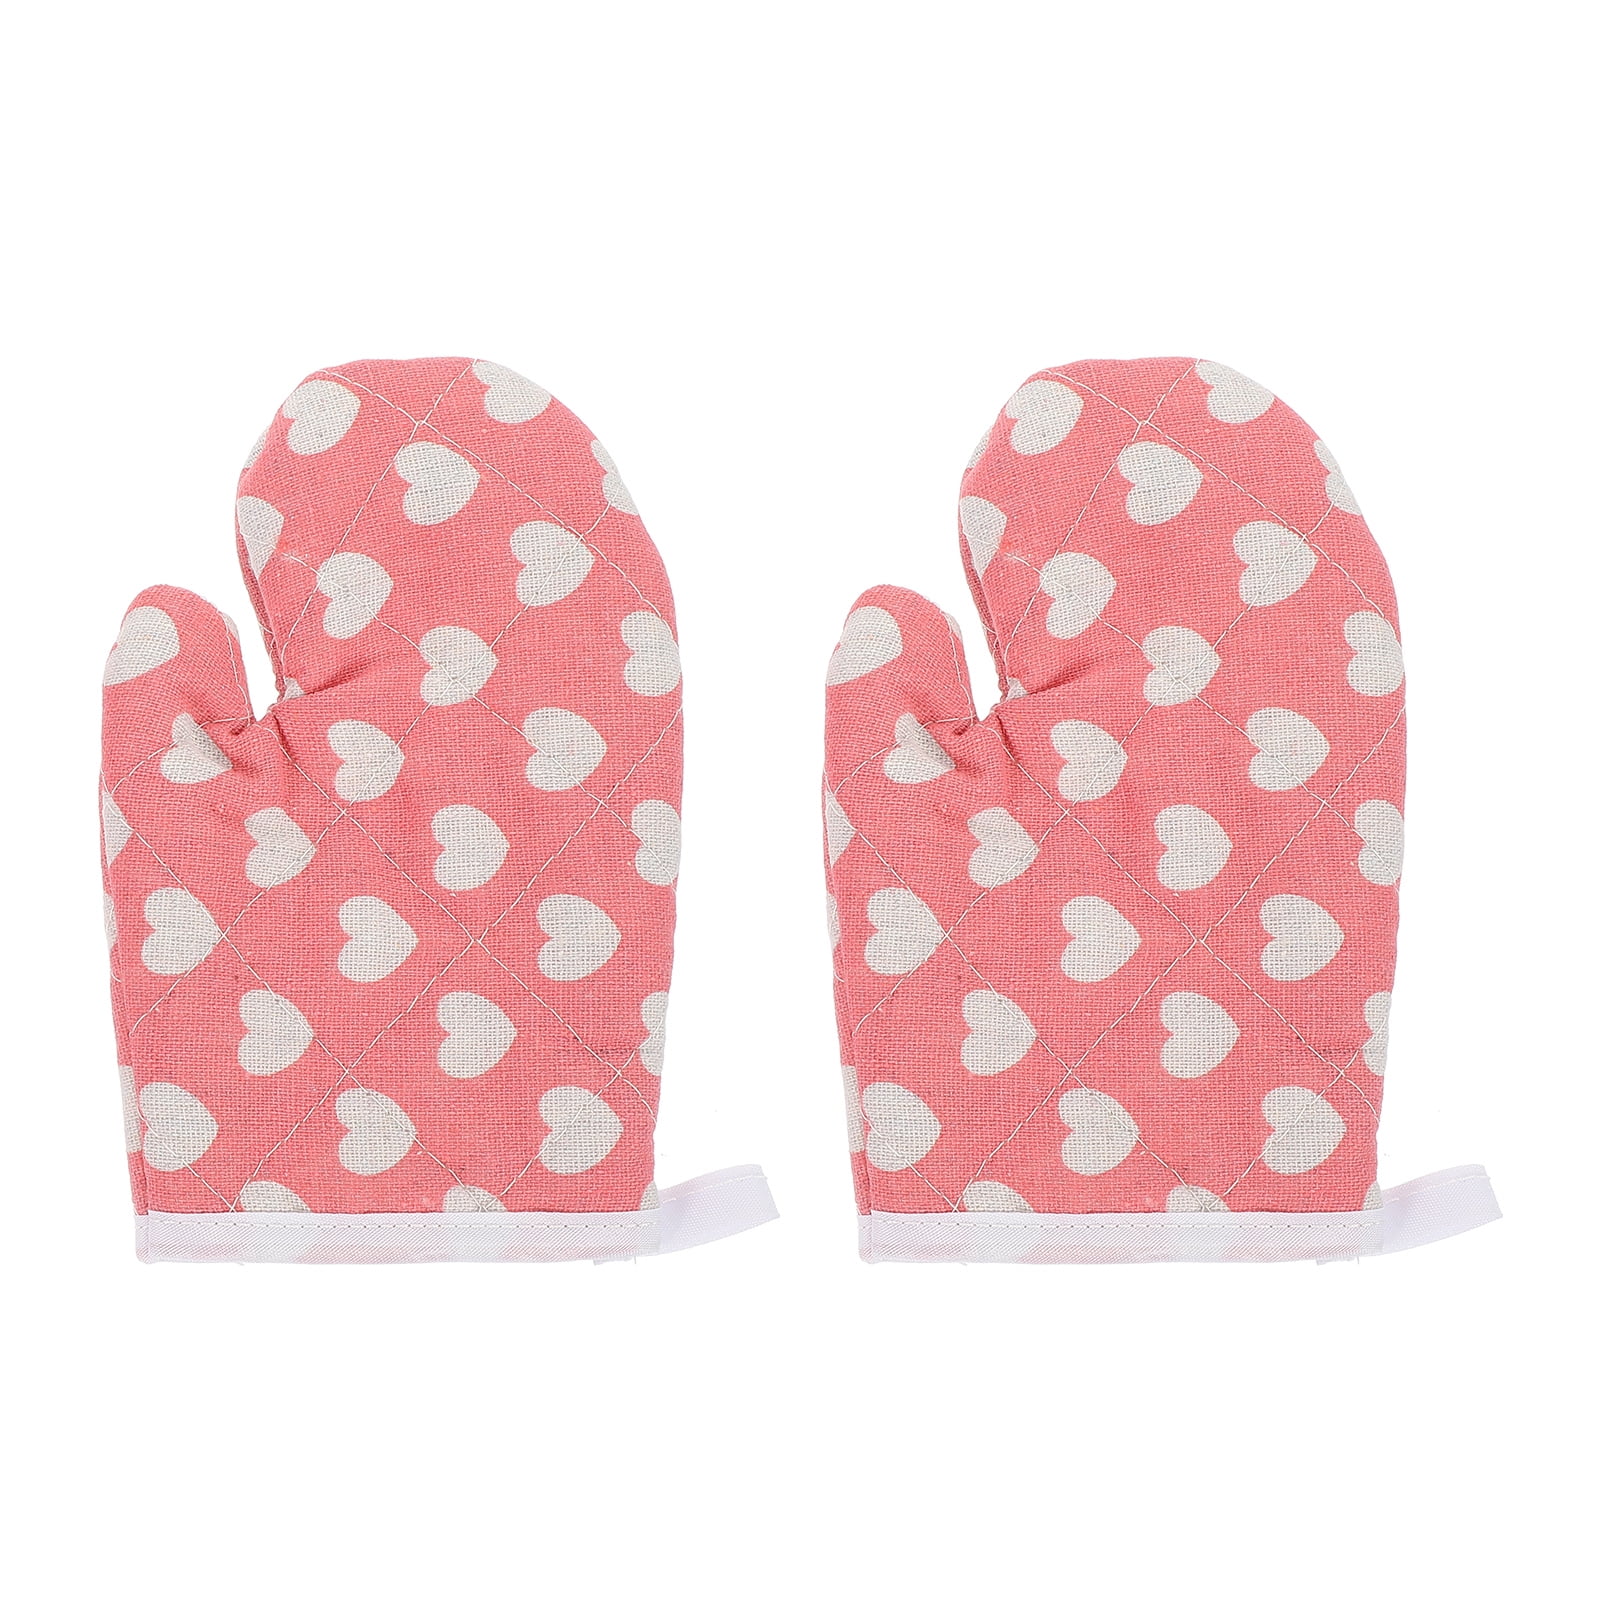 2pcs/set Christmas Microwave Oven Gloves Kitchen Household Baking Heat  Resistant High Temperature Oven Mitts